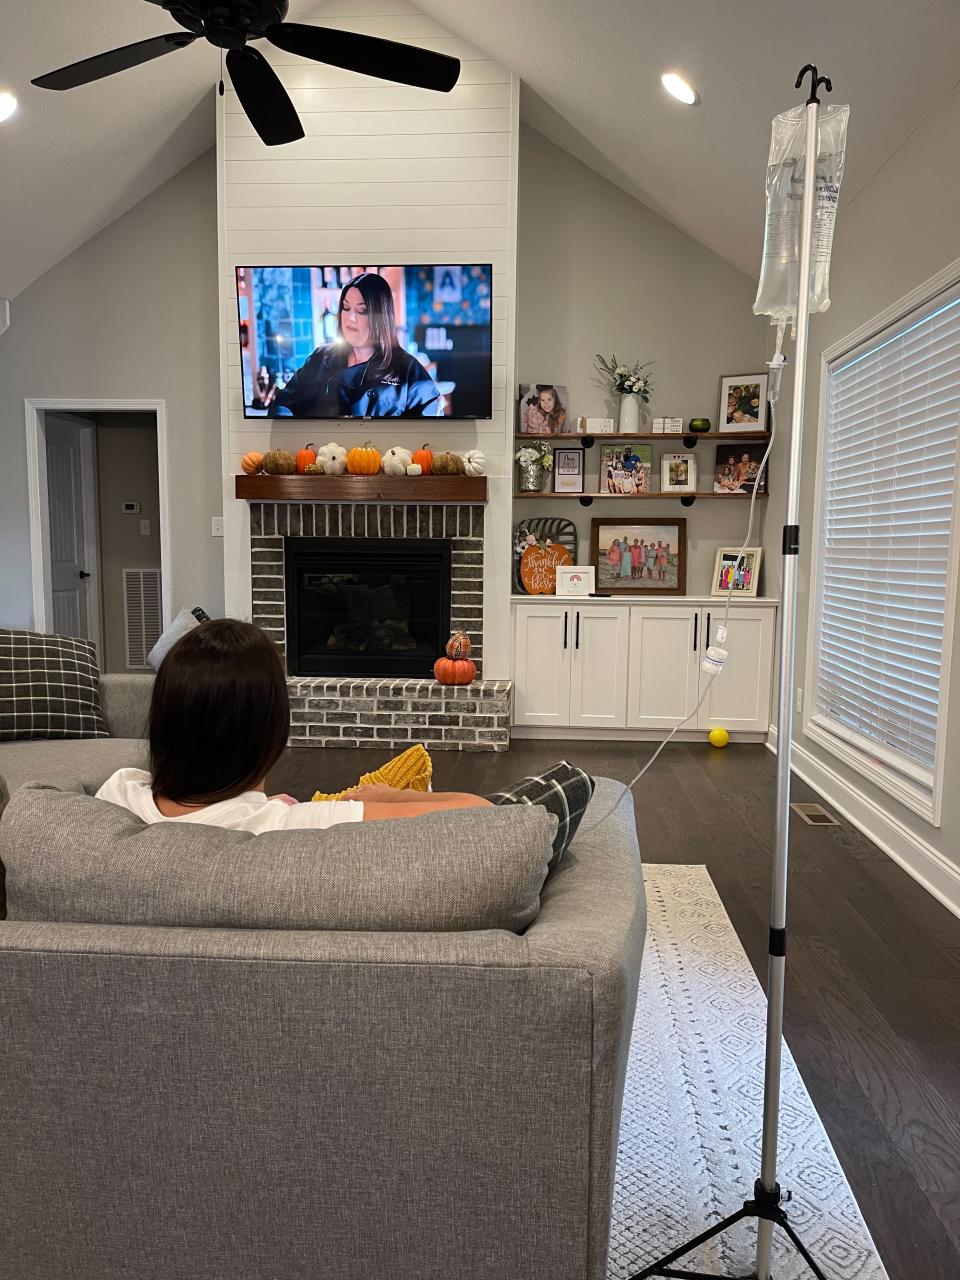 Clients can enjoy TV in the comfort of their home and still have an IV treatment.